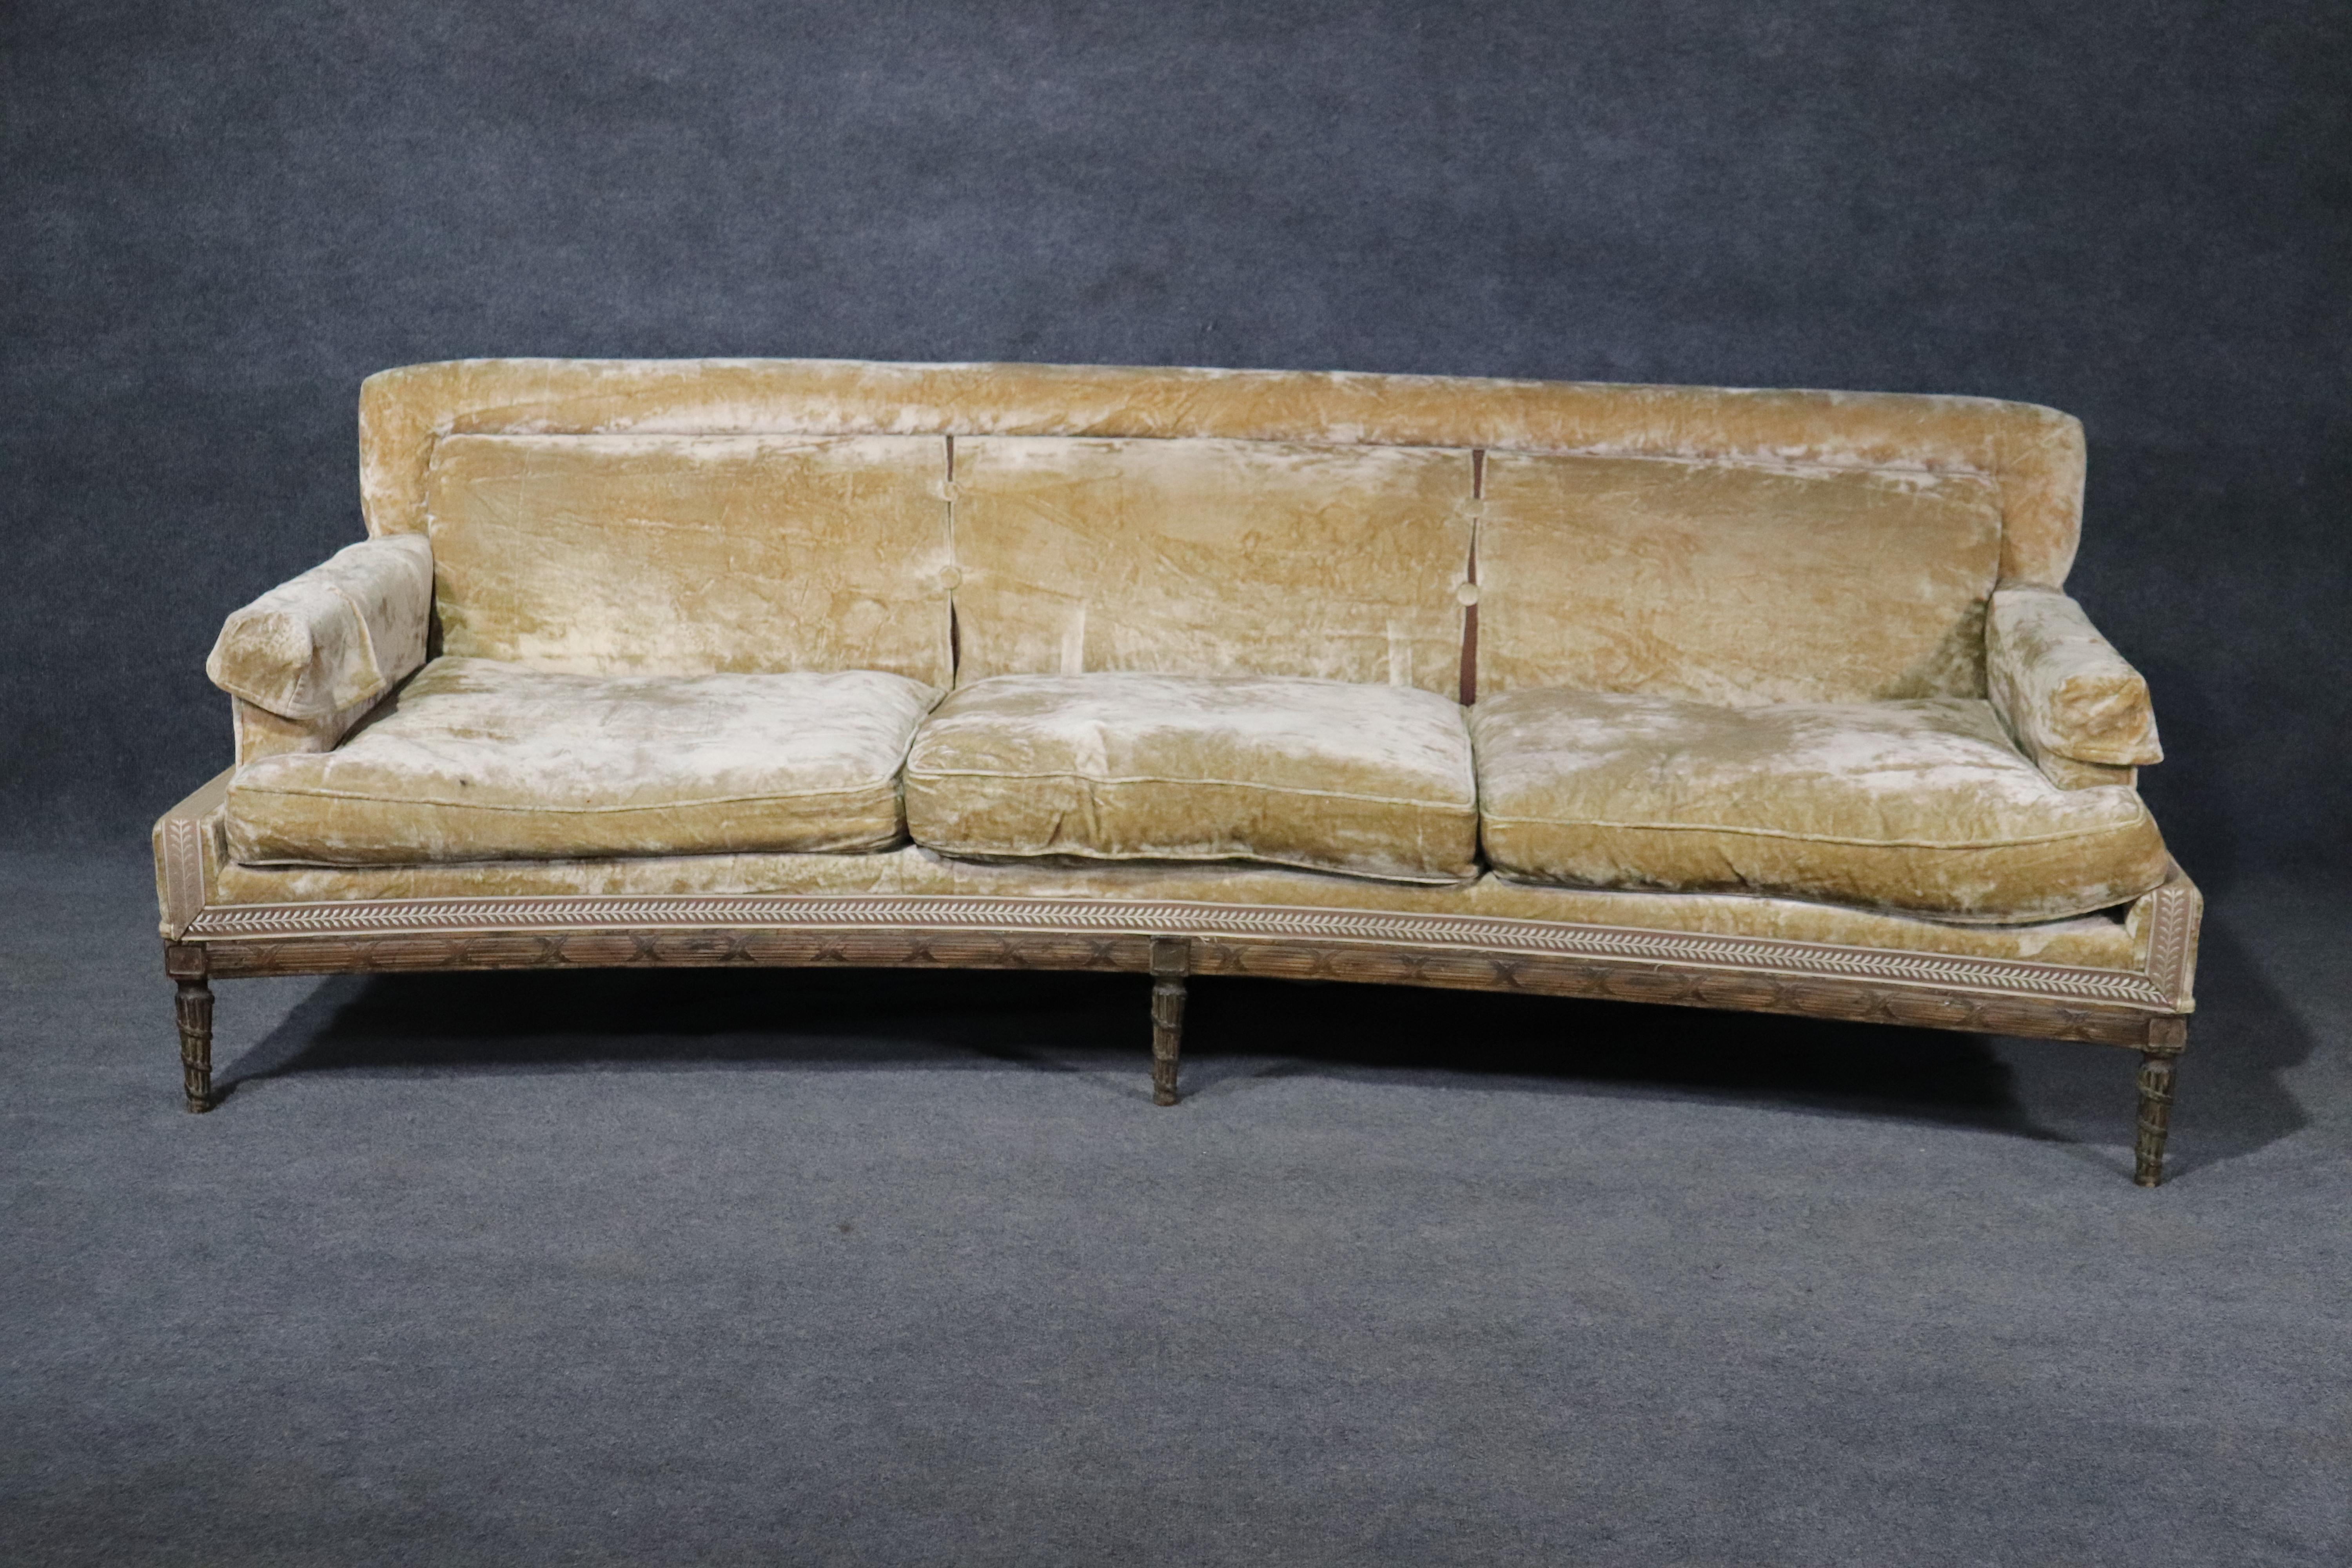 This is a rare and extremely refined and sophisticated Louis XVI style sofa fitted with goose down filled pillows and a fantastic sand colored velvet or chenille upholstery. This sofa is in superb condition with no damage to the frame and the fabric